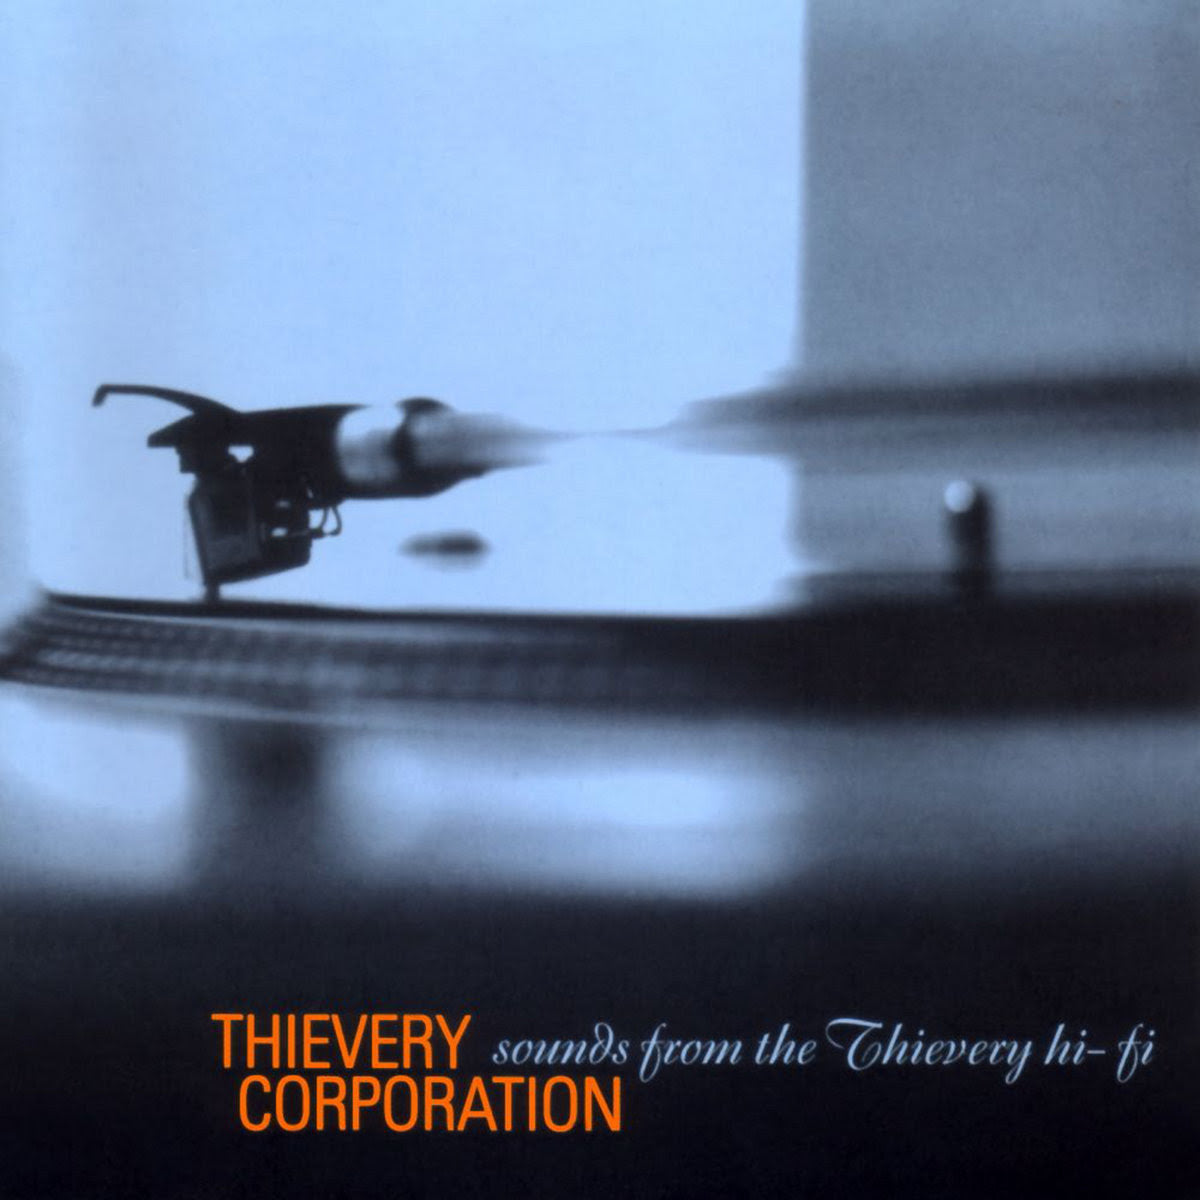 Thievery Corporation - Sounds From The Thievery Hi-Fi | Buy the Vinyl LP from Flying Nun Records